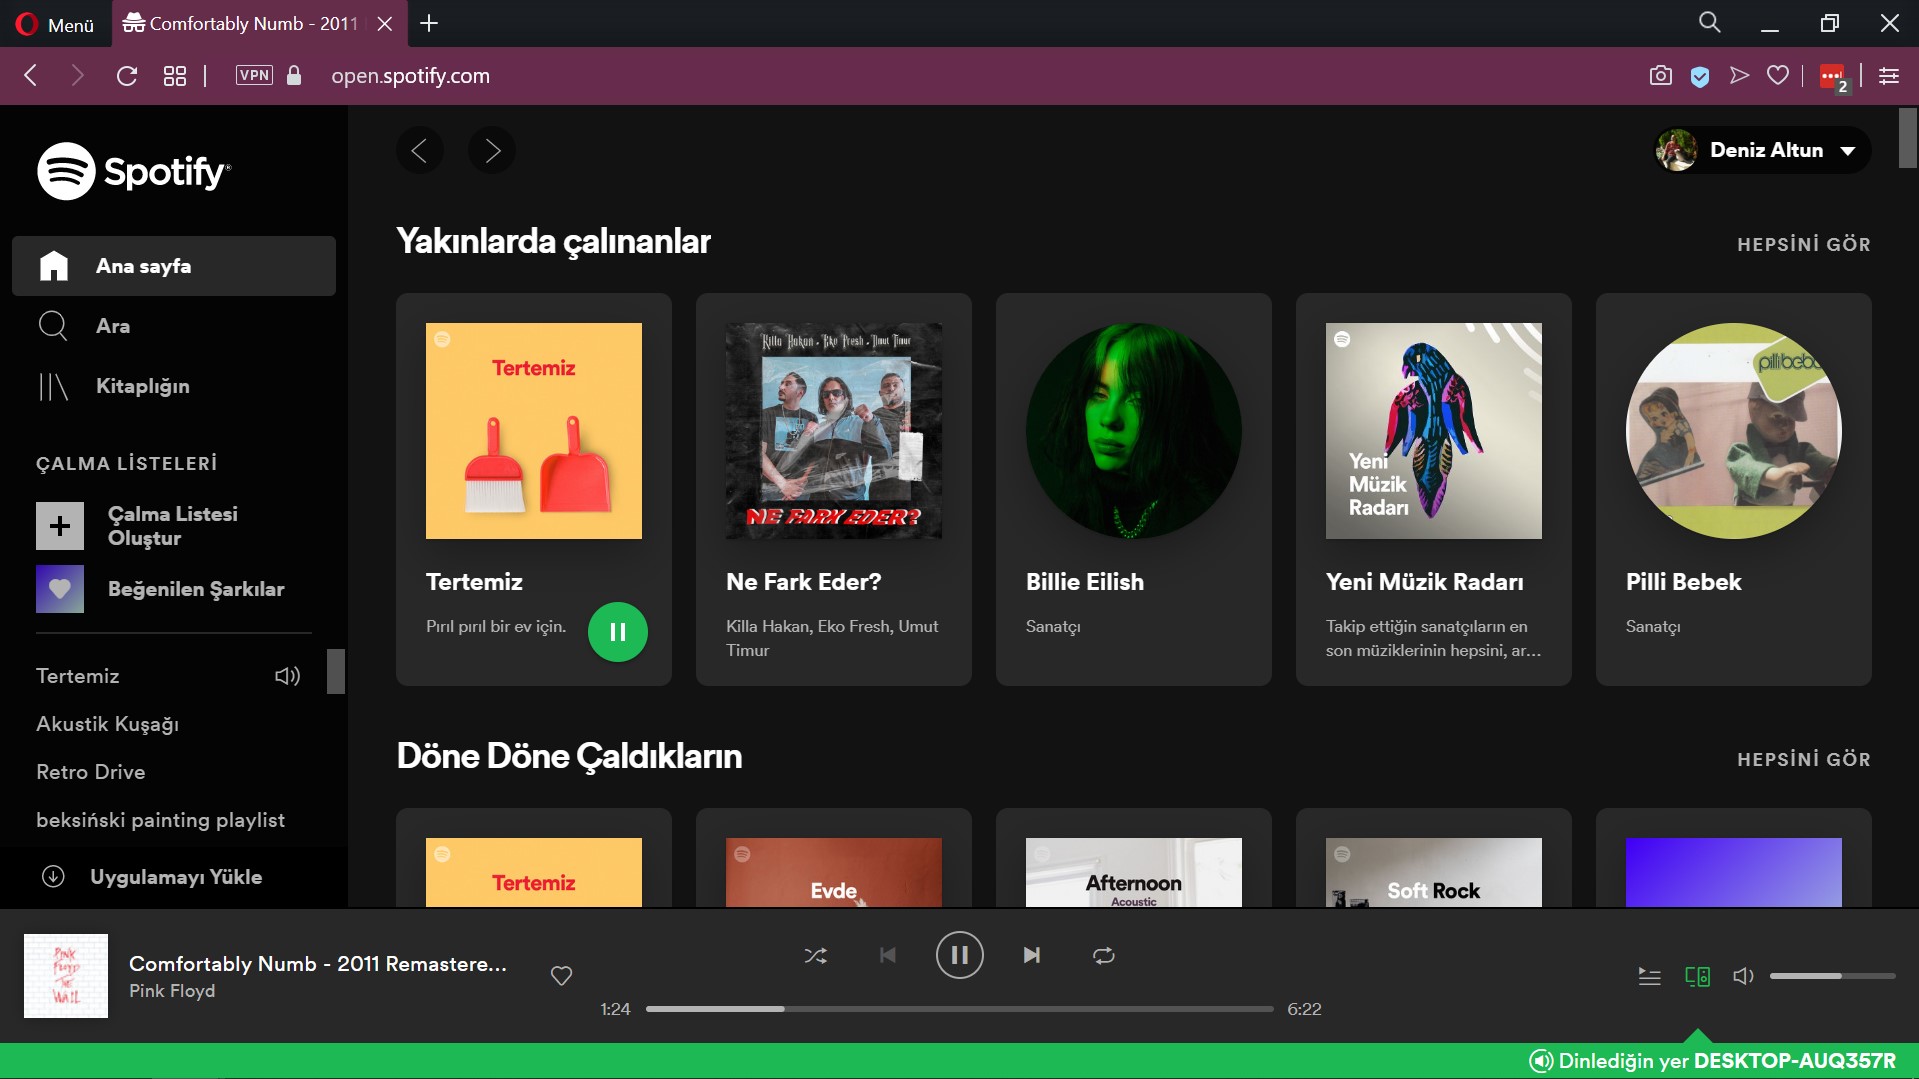 Miniplayer Removed? - Page 2 - The Spotify Community